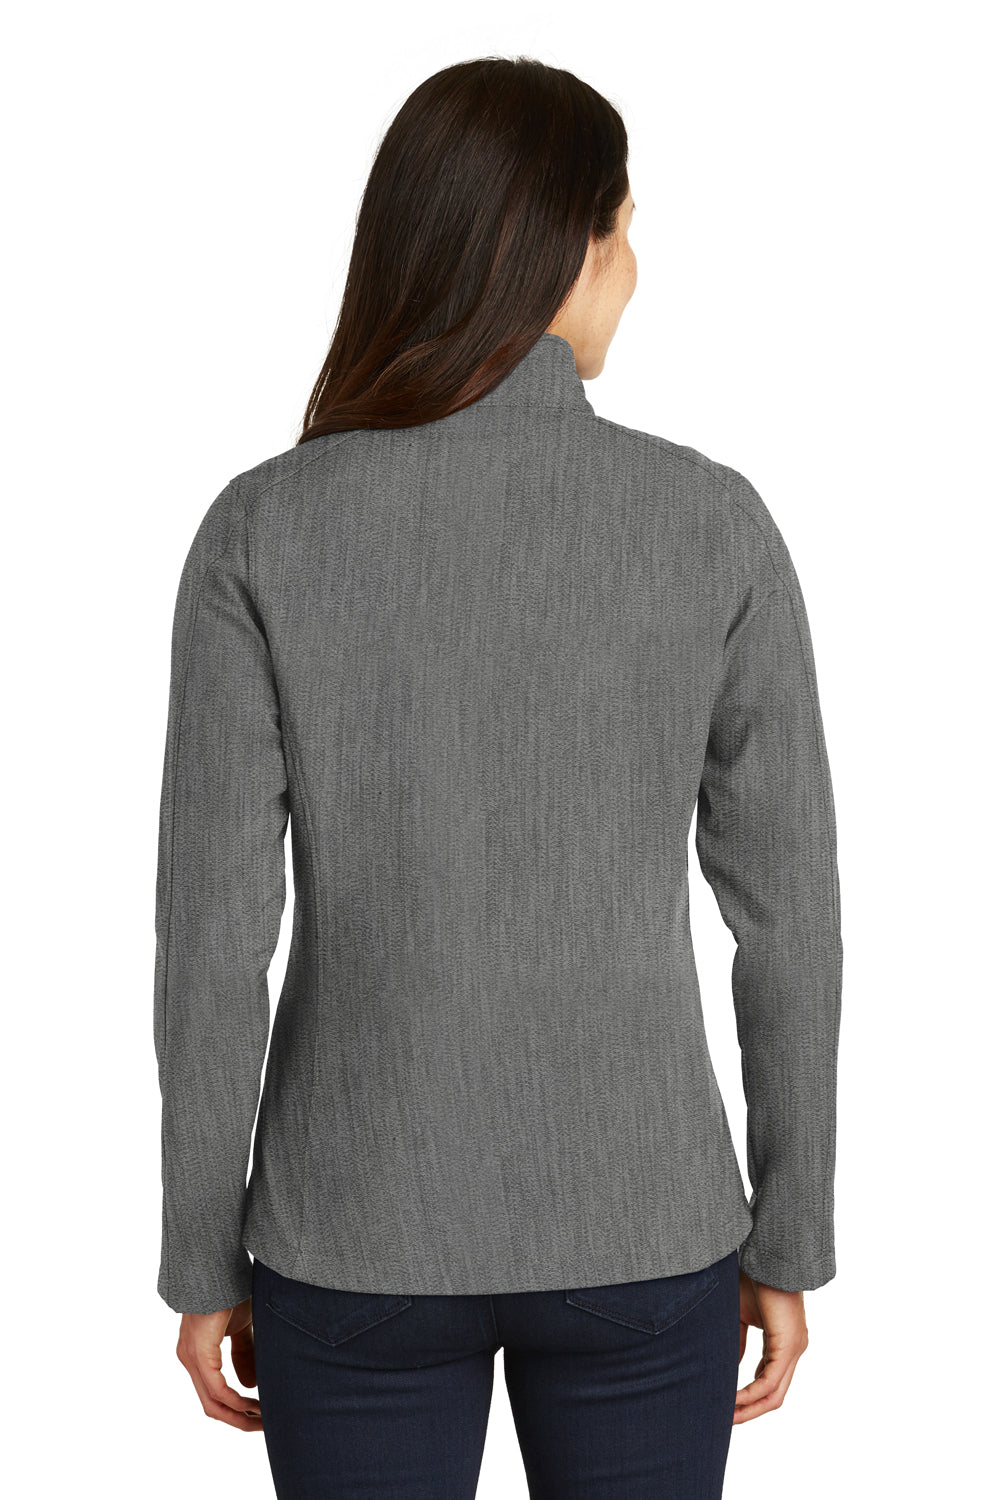 Port Authority L317 Womens Core Wind & Water Resistant Full Zip Jacket Heather Pearl Grey Back